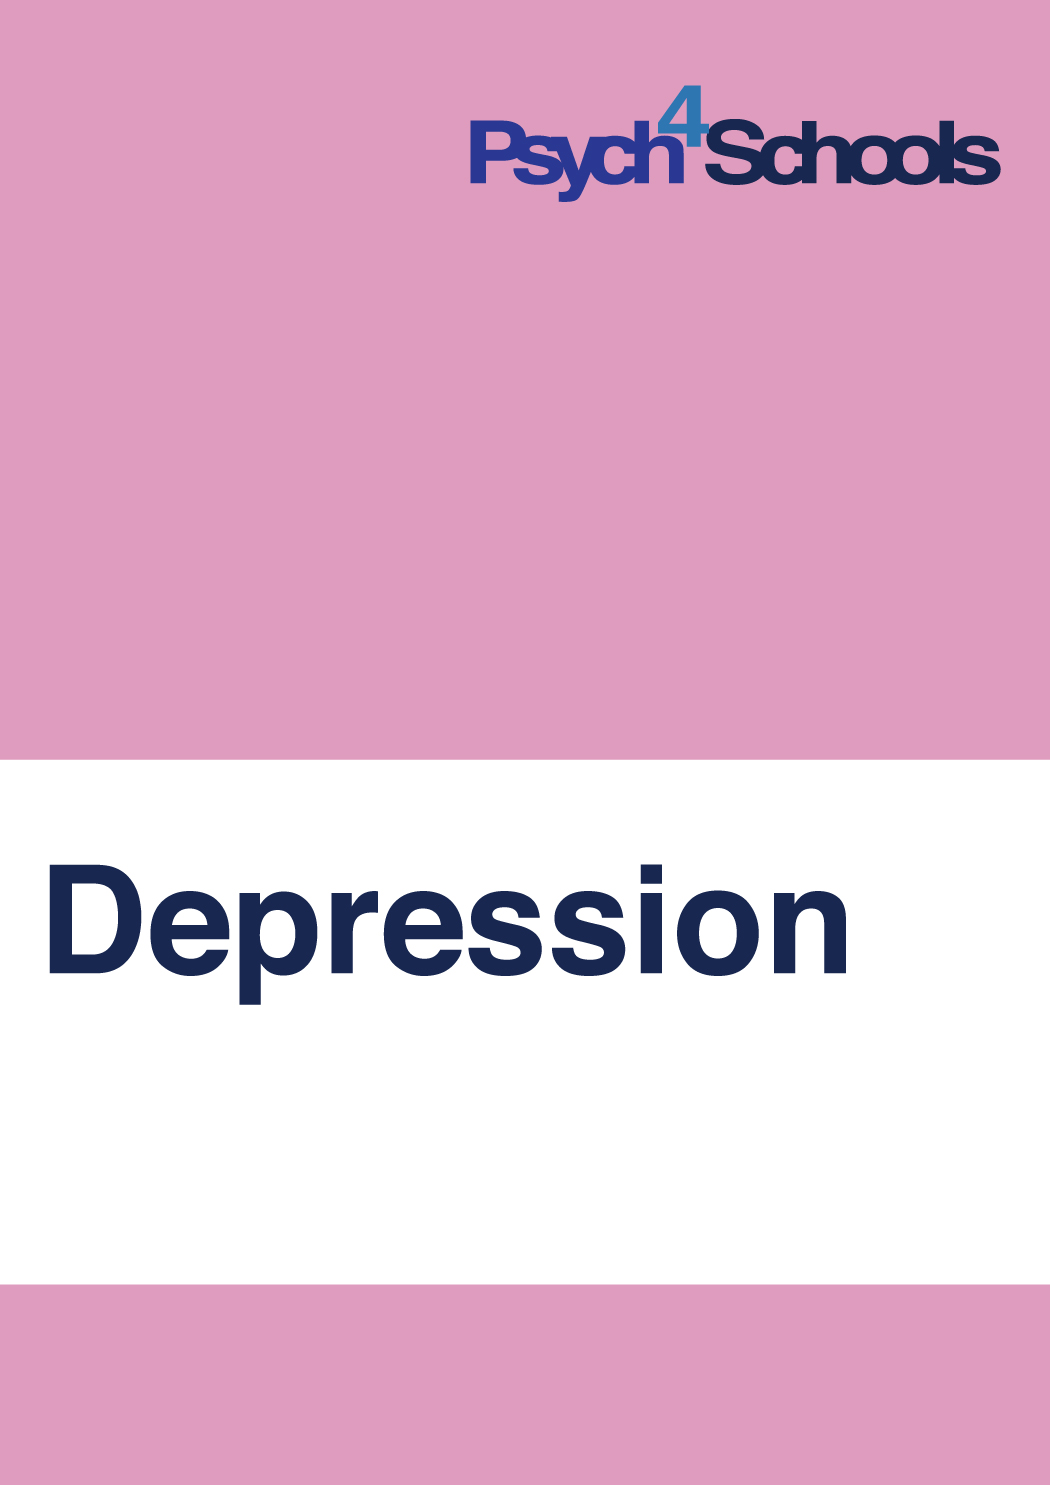 New ebooklet available – Working with children who are depressed (and helping prevent depression)